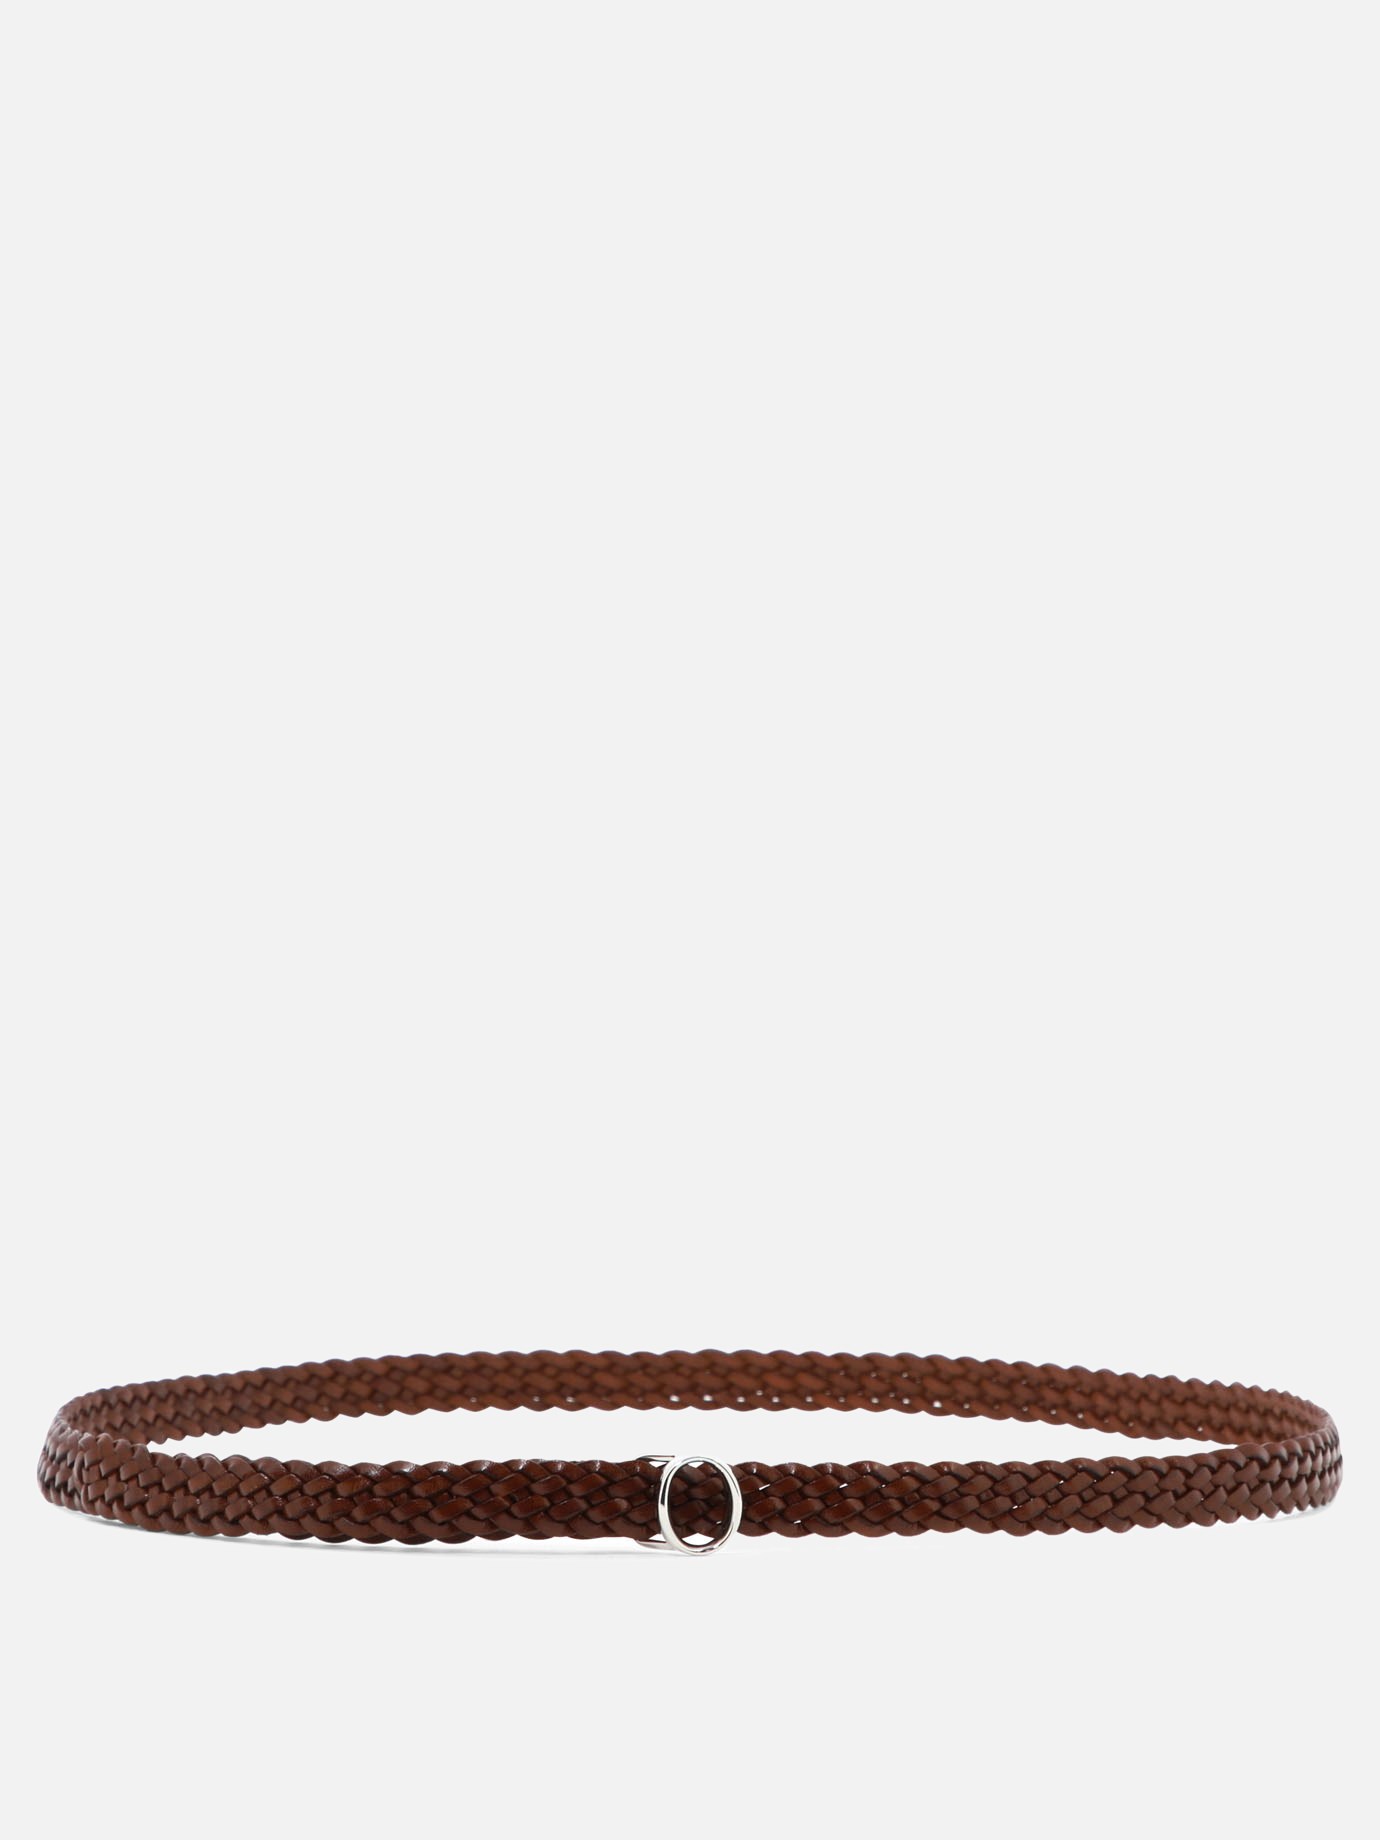 Woven leather beltby Orciani - 3